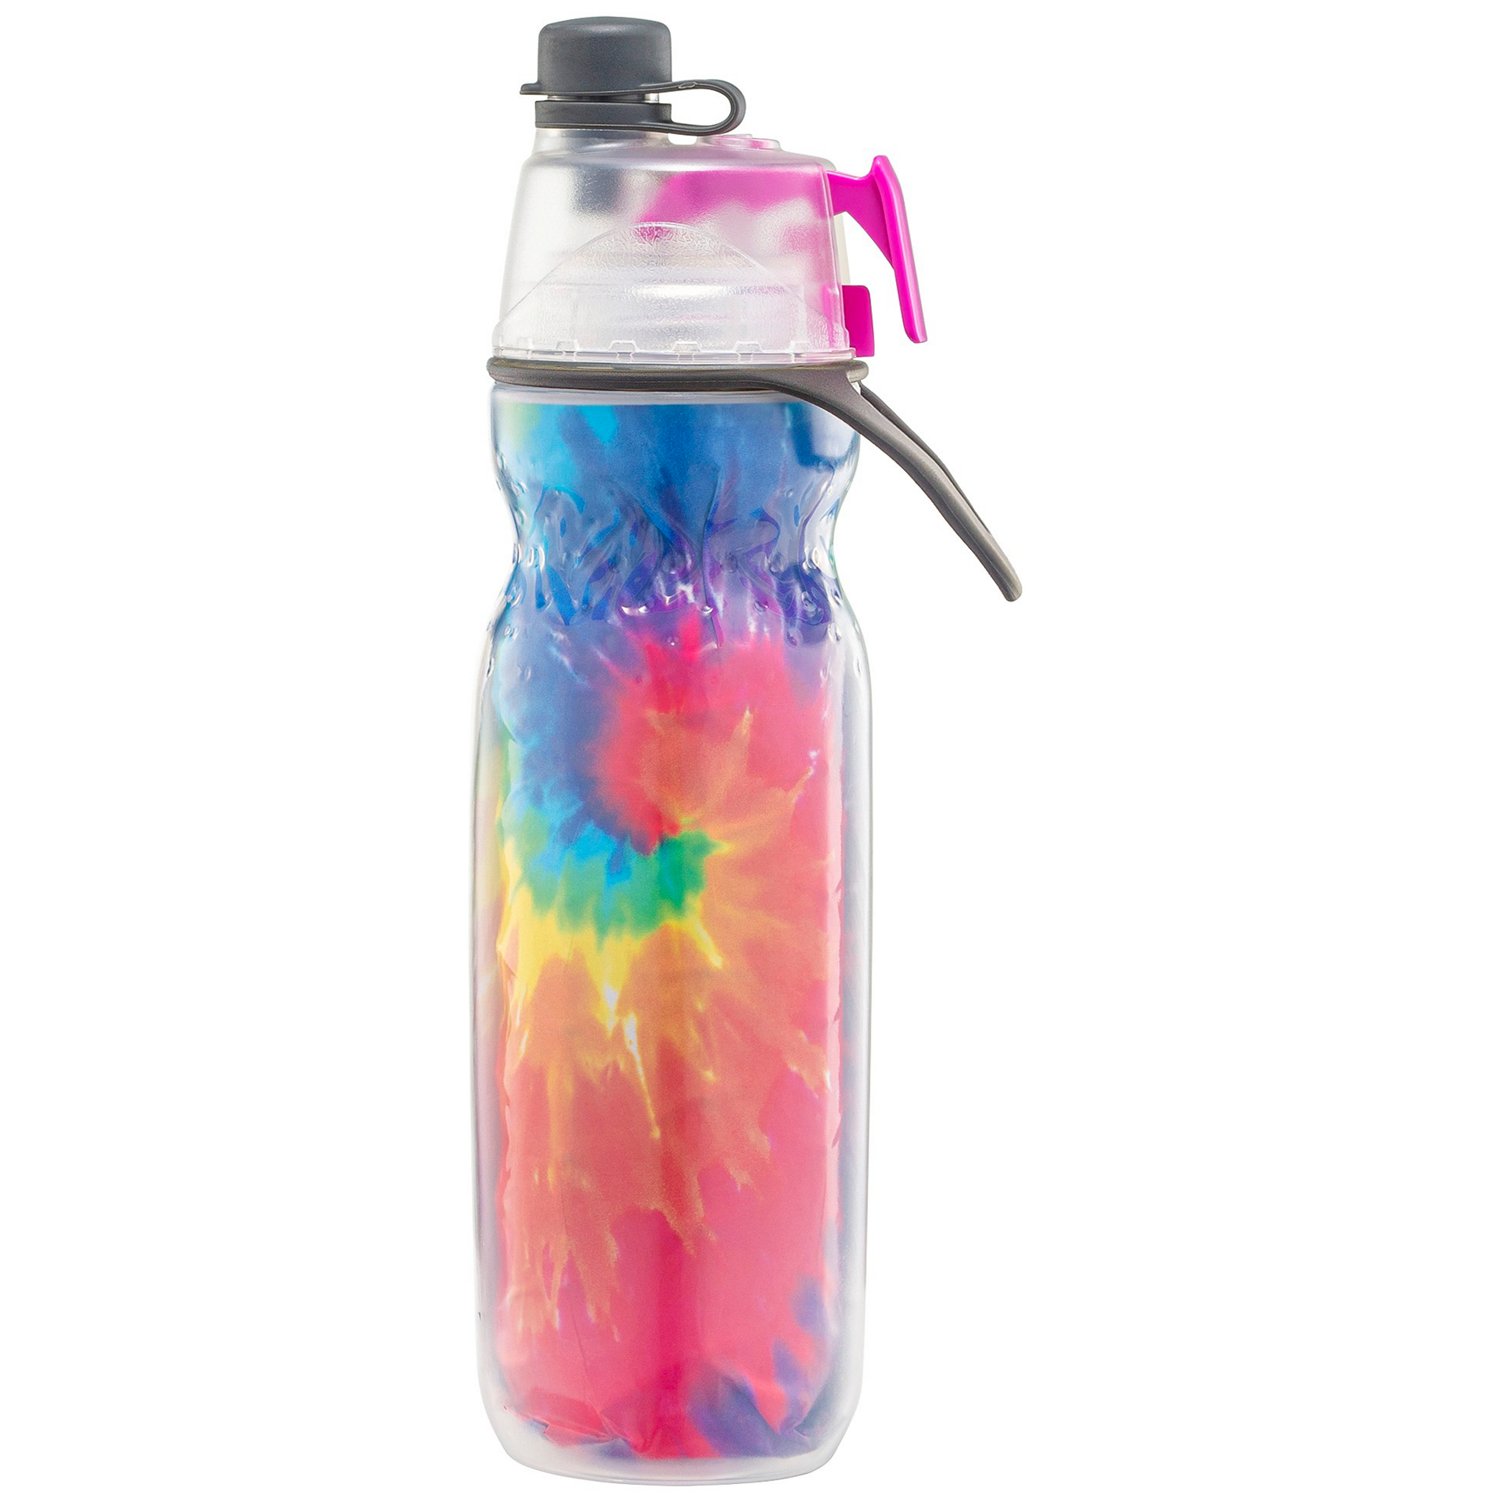 12 oz. Tie Dye Can Cooler - Official Tennessee Titans Store